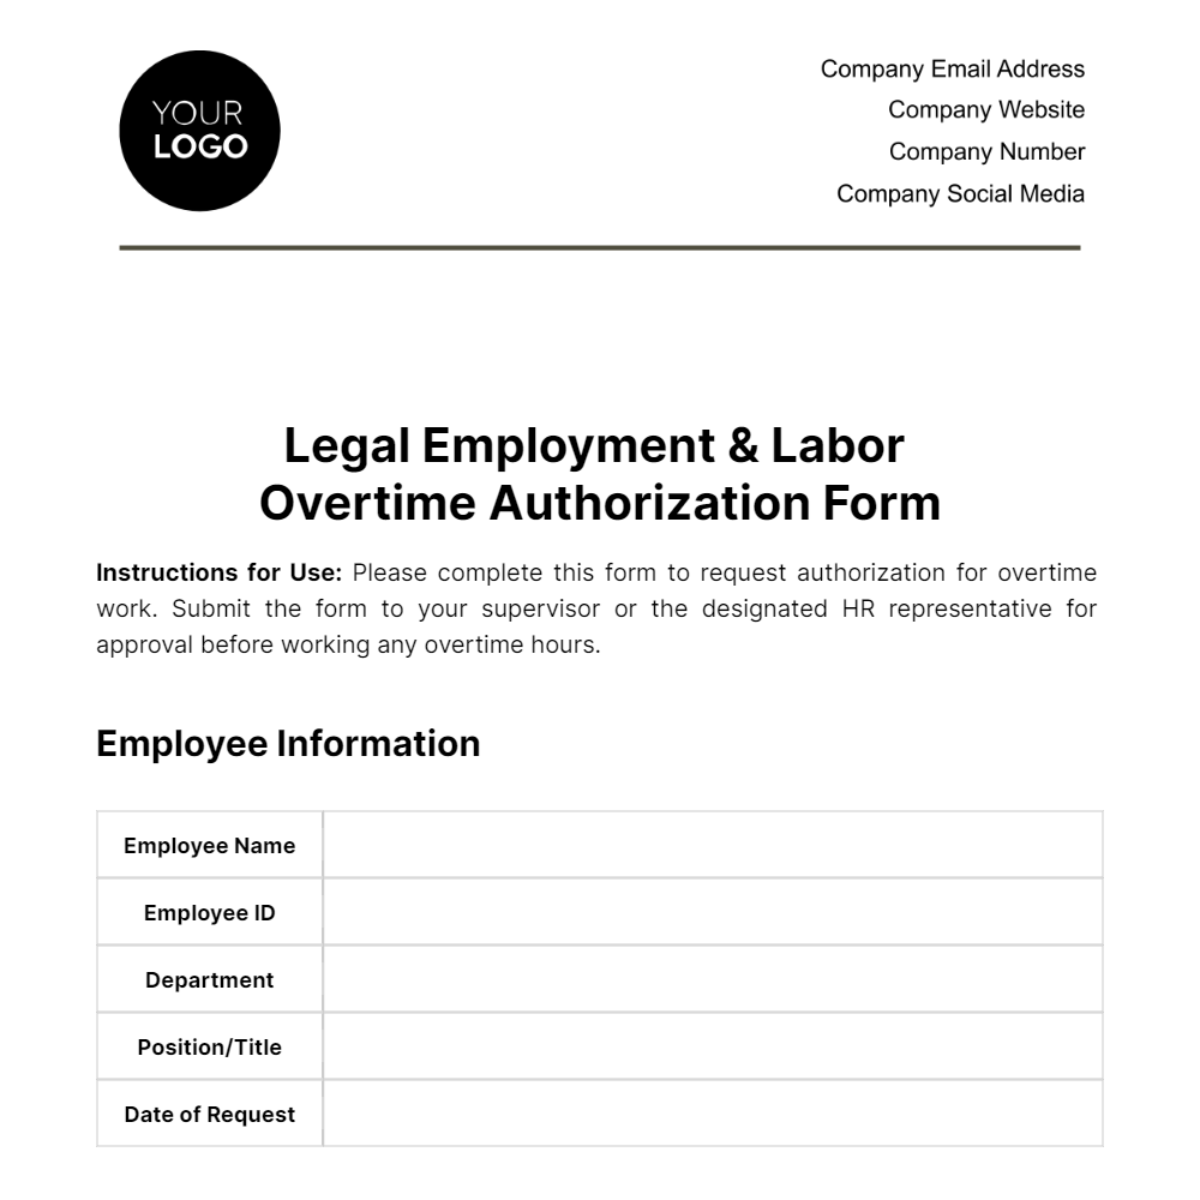 Free Legal Employment & Labor Overtime Authorization Form Template